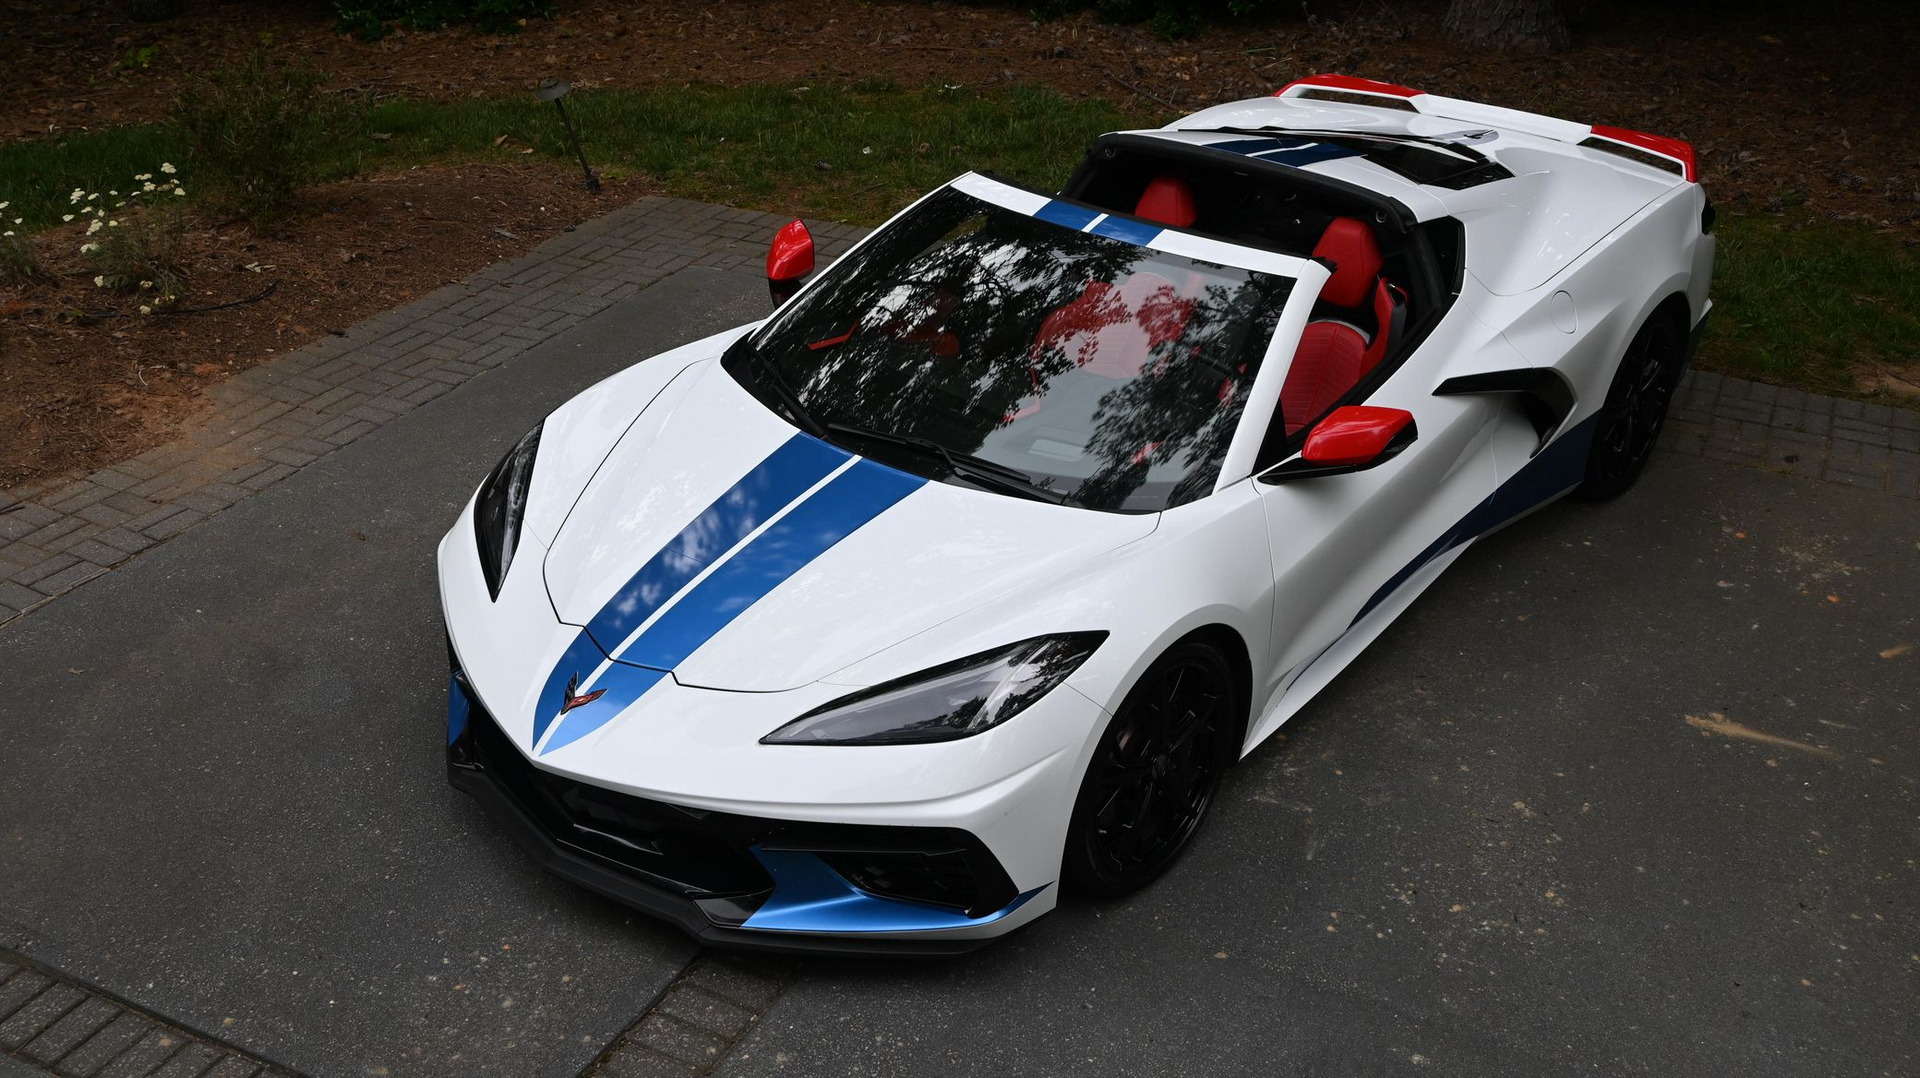 Red, White, And Blue C8 Corvette That Sold For $90k Screams "America